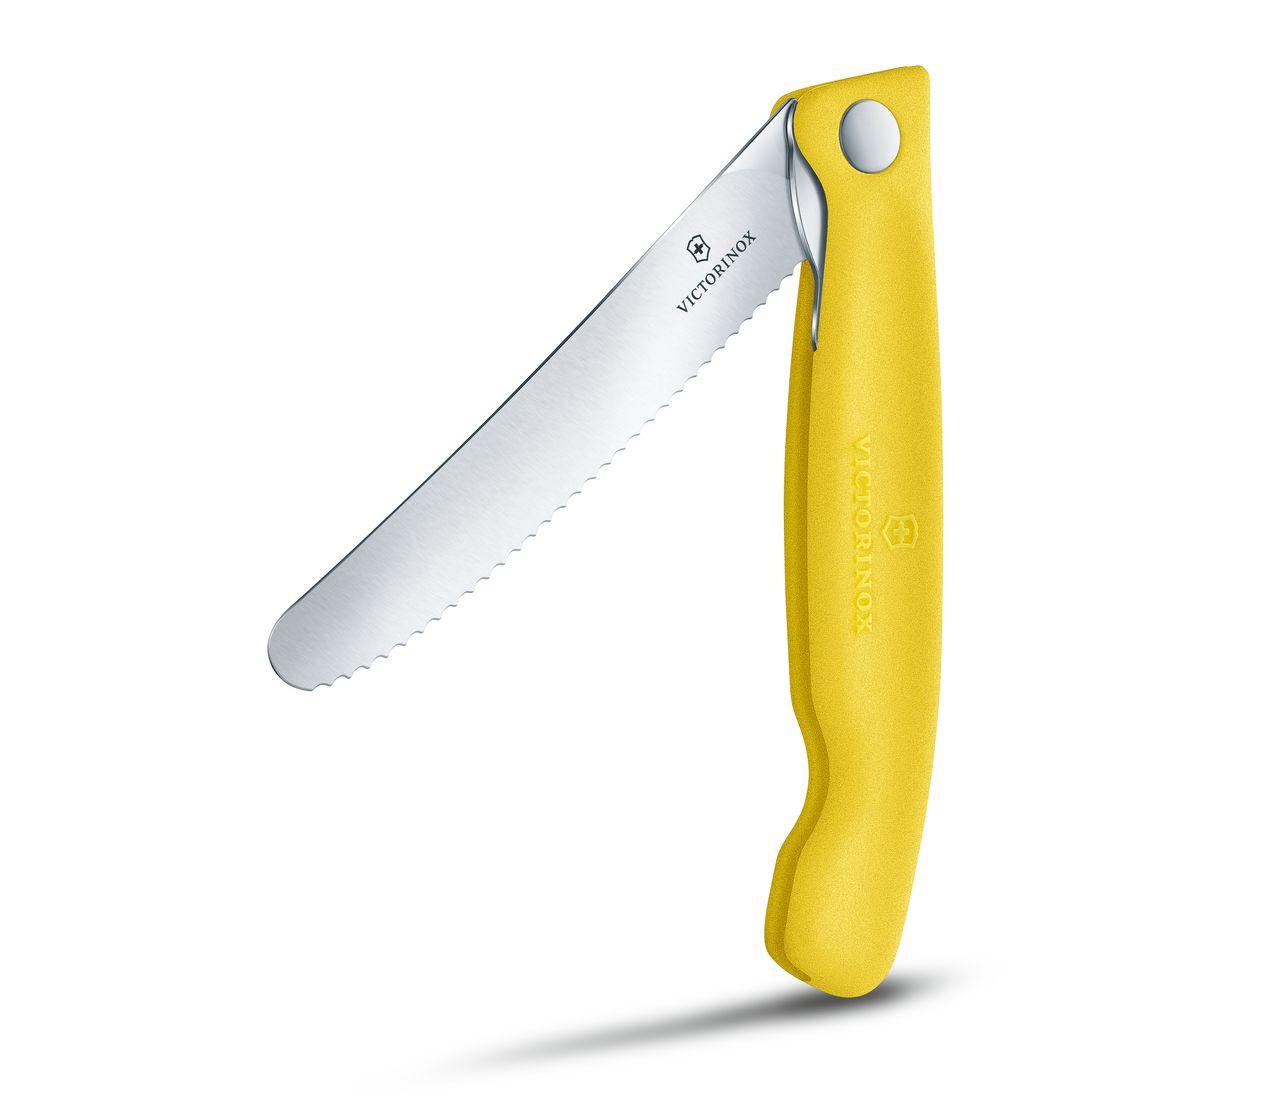 Victorinox Fibrox® Stainless Steel Curved Boning Knife with Yellow